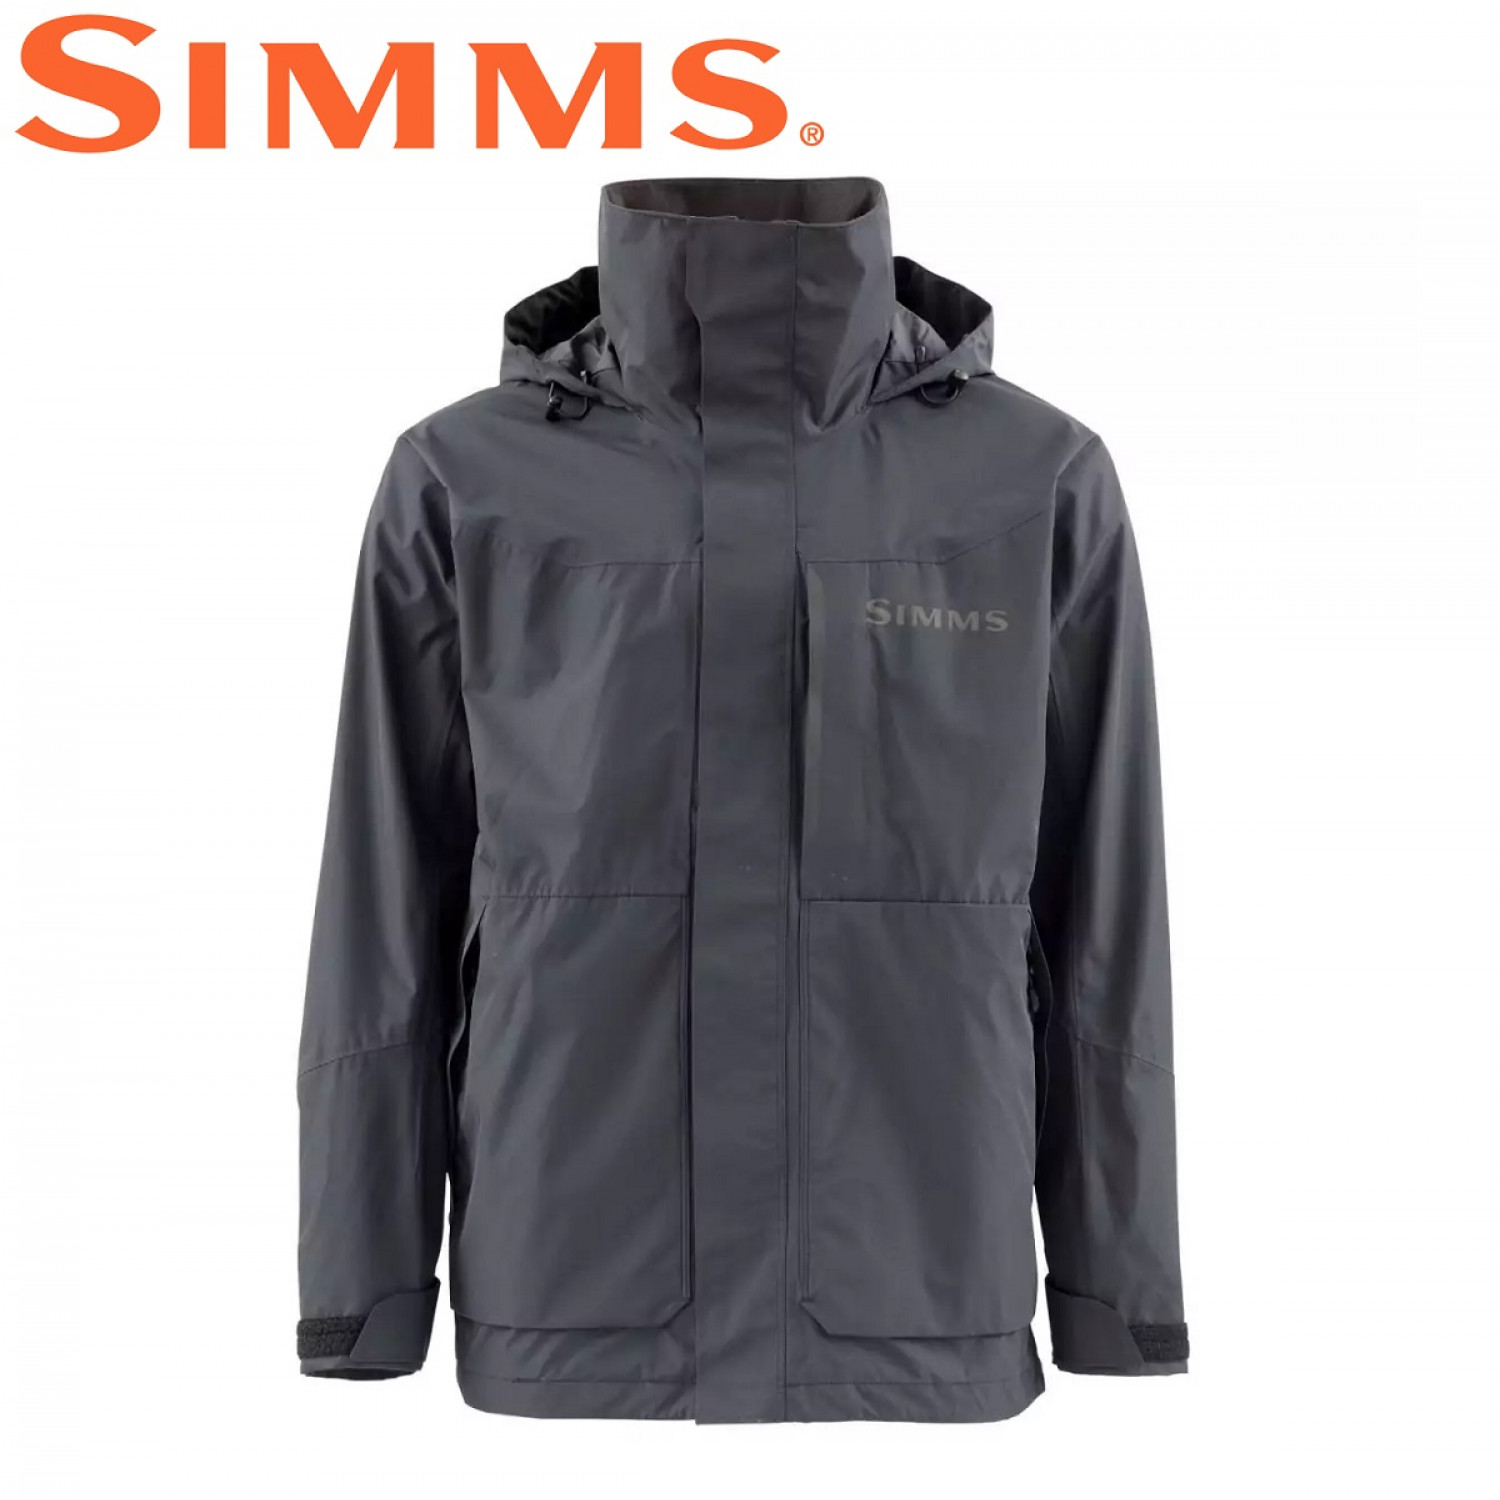 Simms challenger insulated